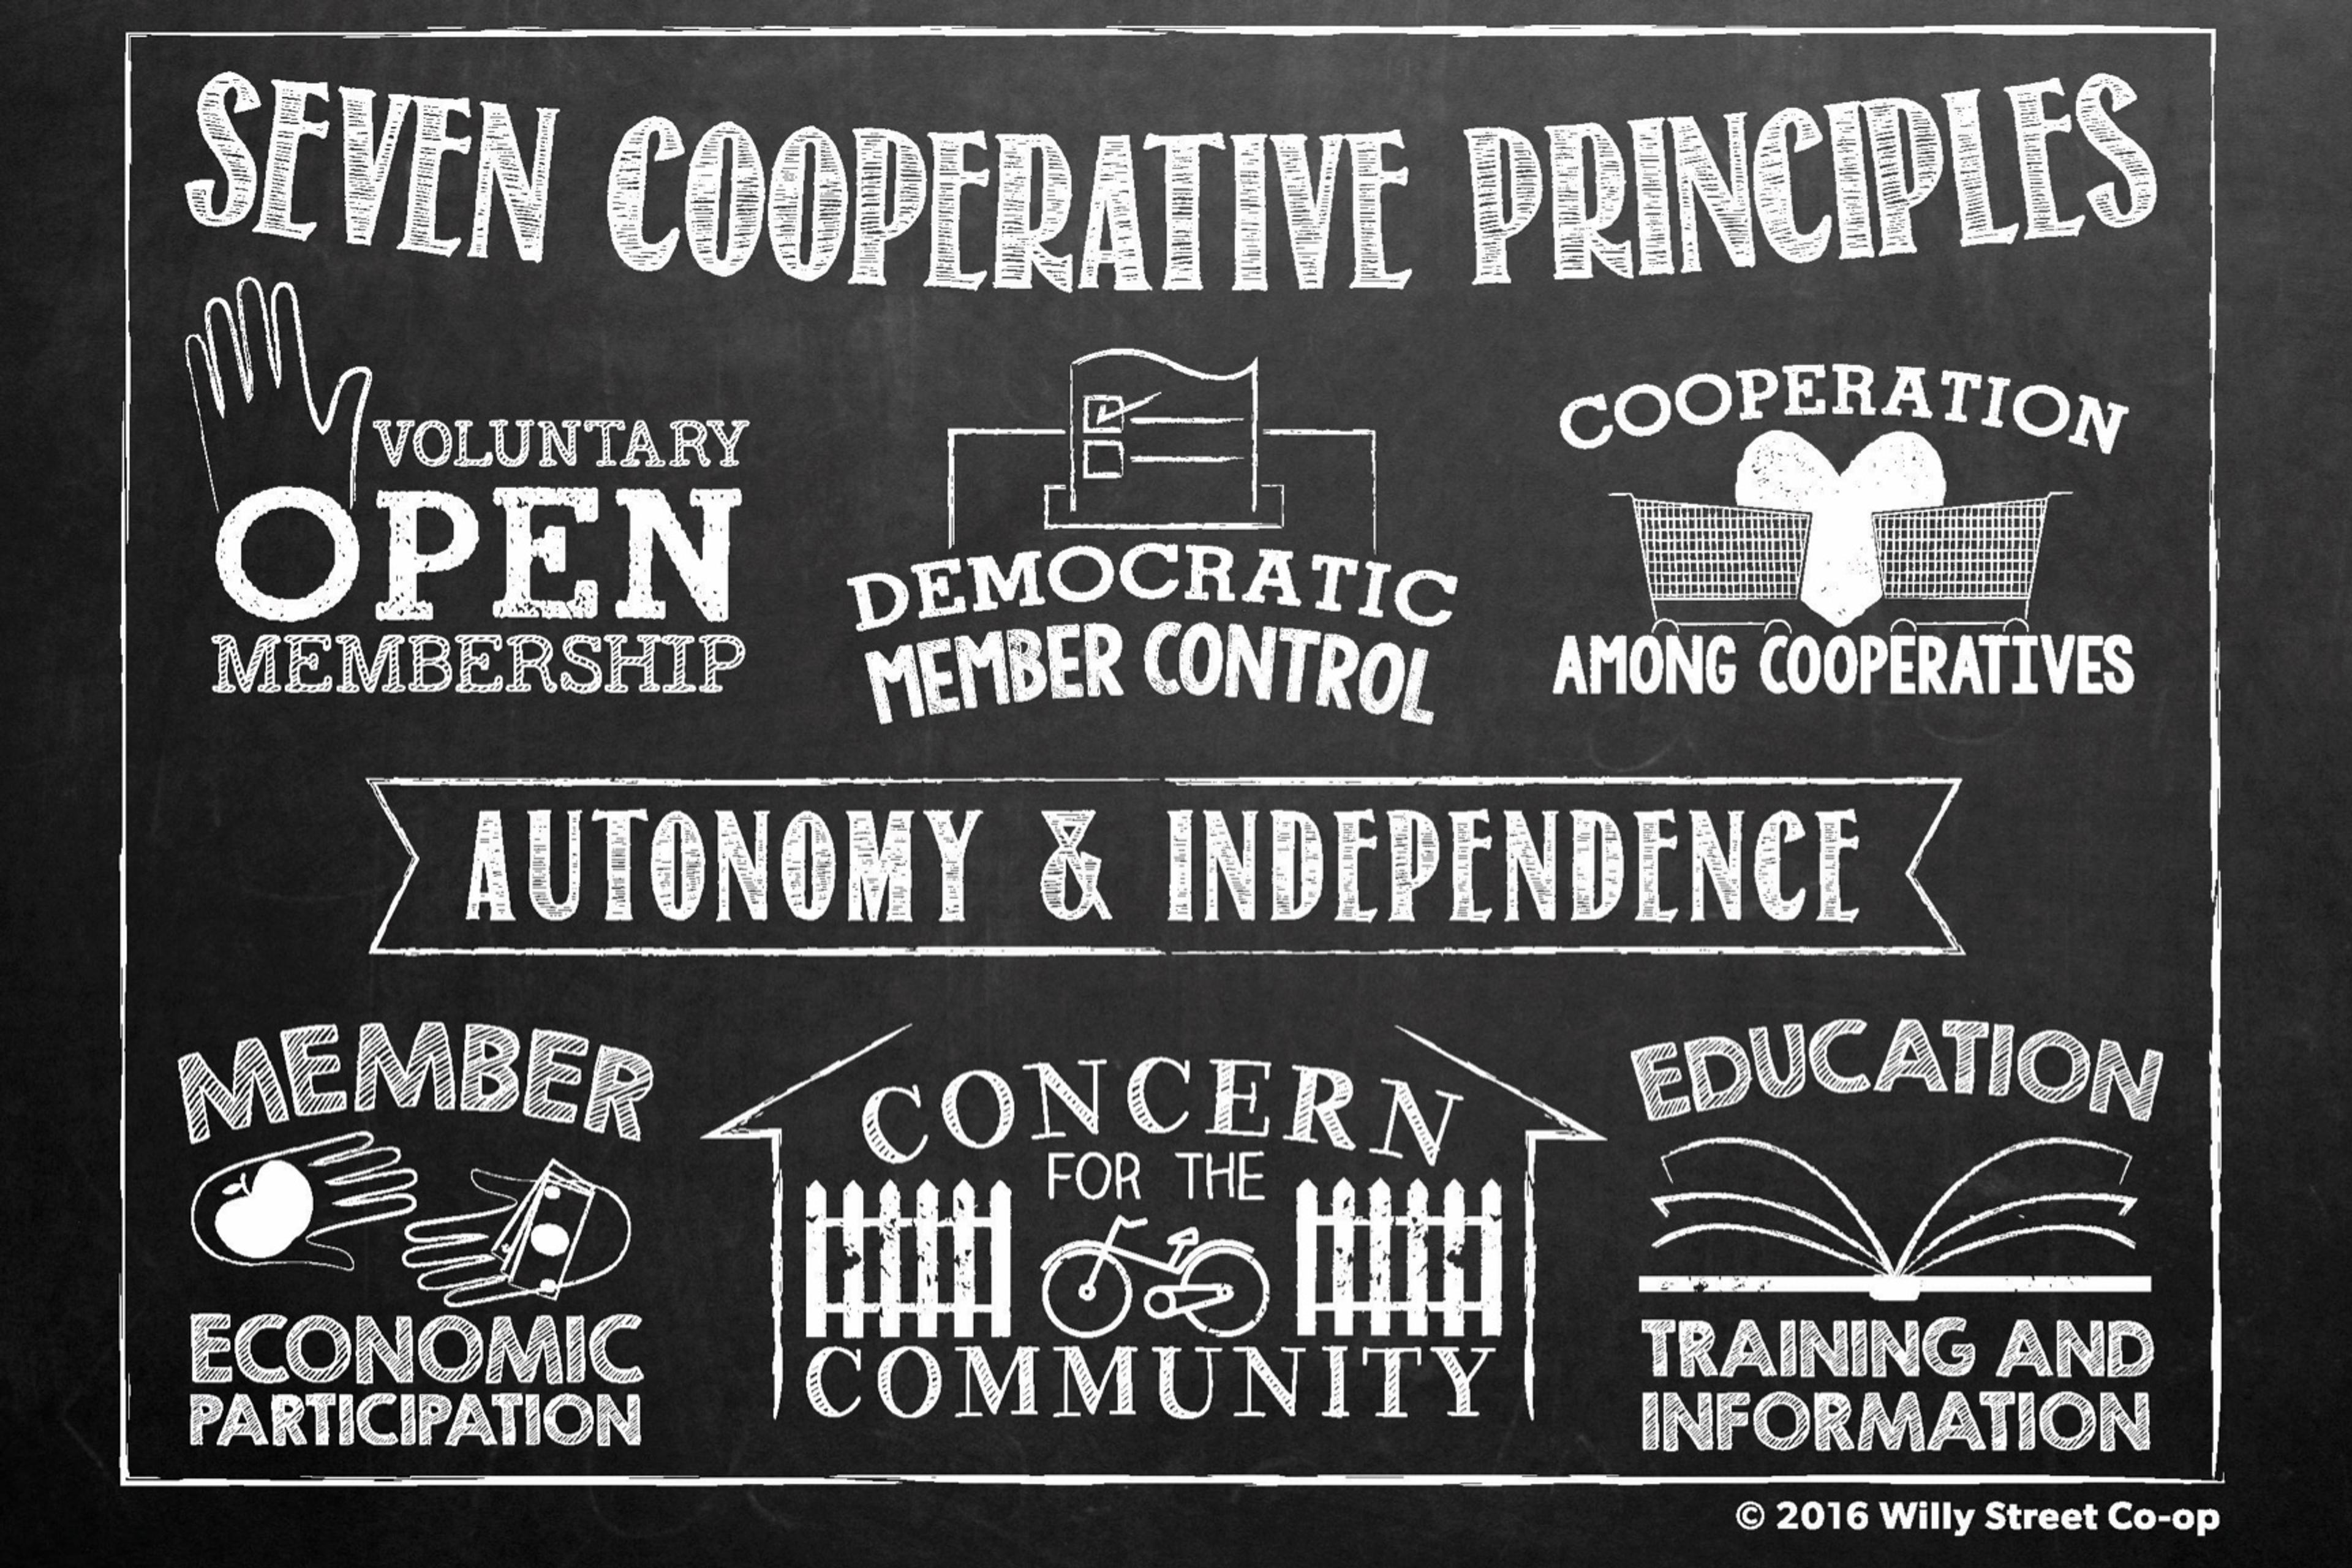 Seven Cooperative Principles: voluntary open membership, democratic member control, cooperation among cooperatives, autonomy and independence, member economic participation, concern for the community, and providing education and training.